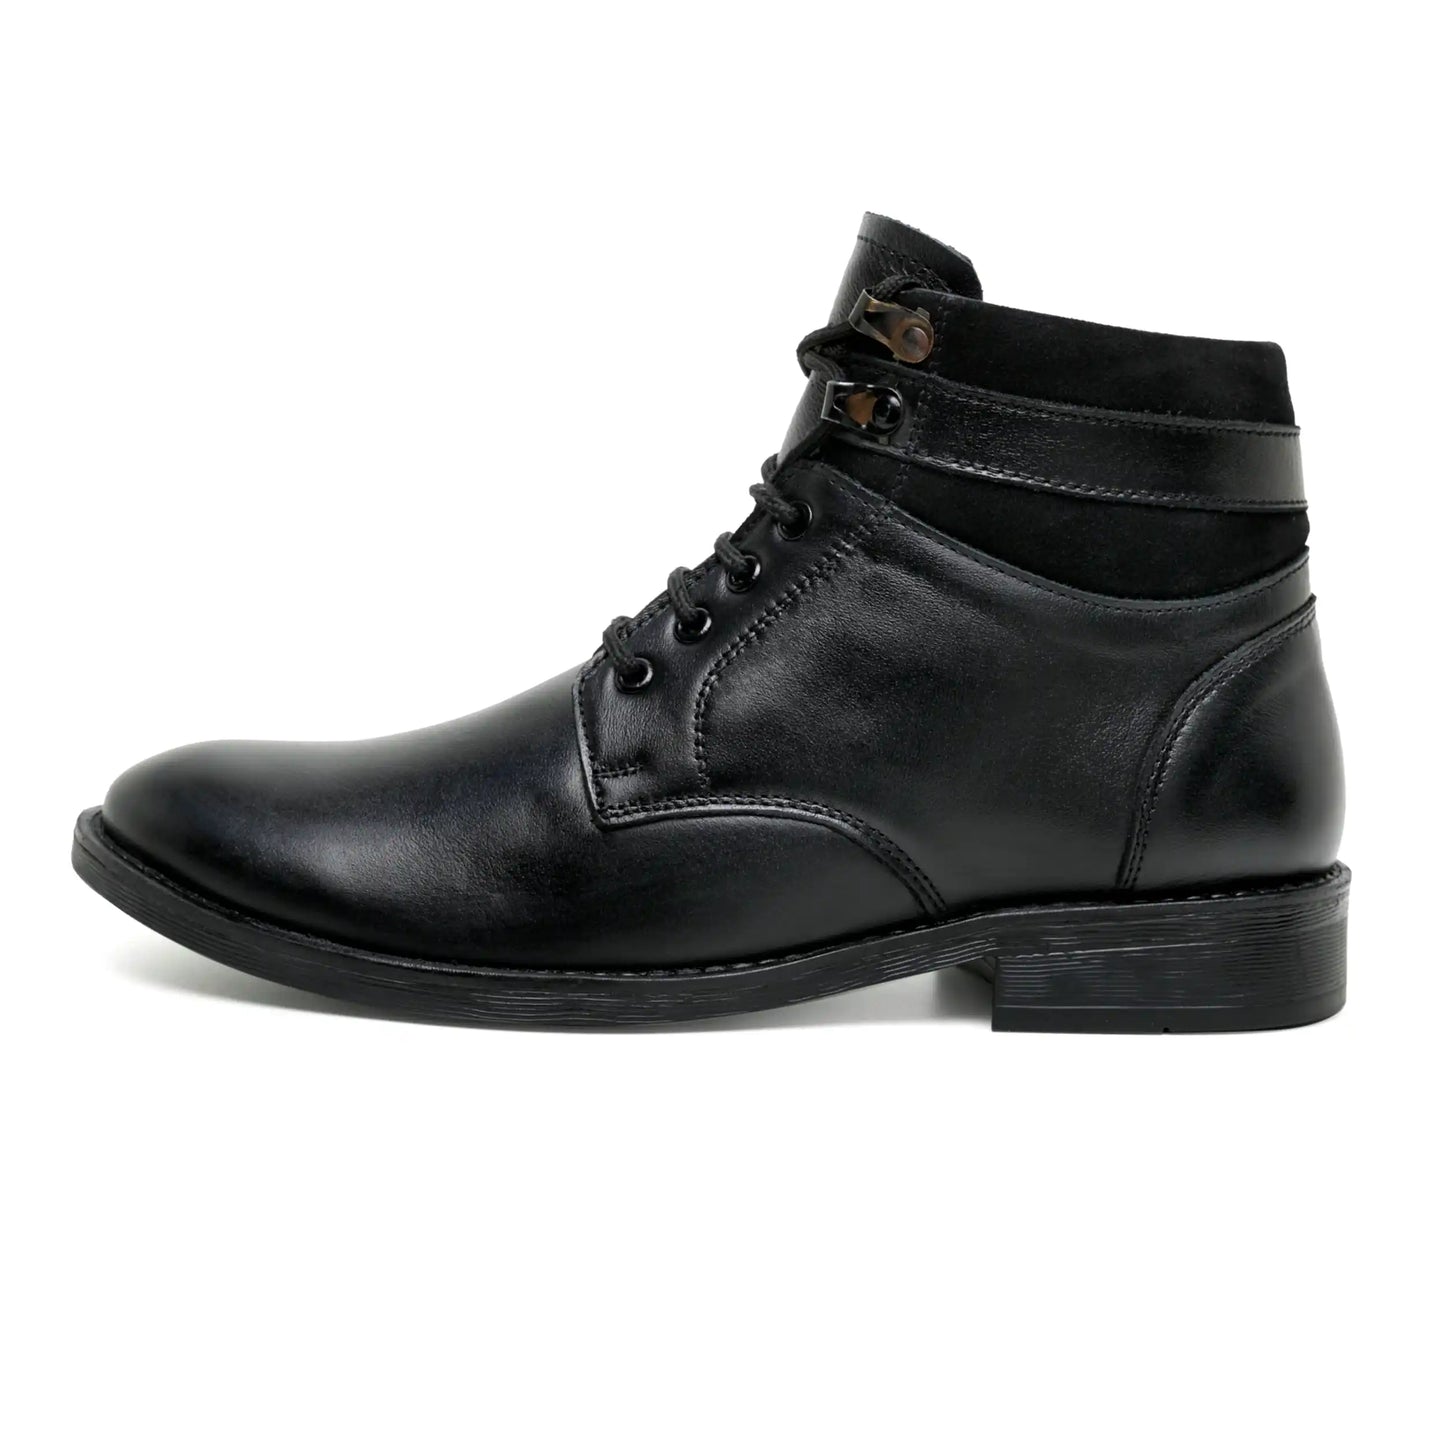 Genuine Leather Boots for Men Ankle Shoes